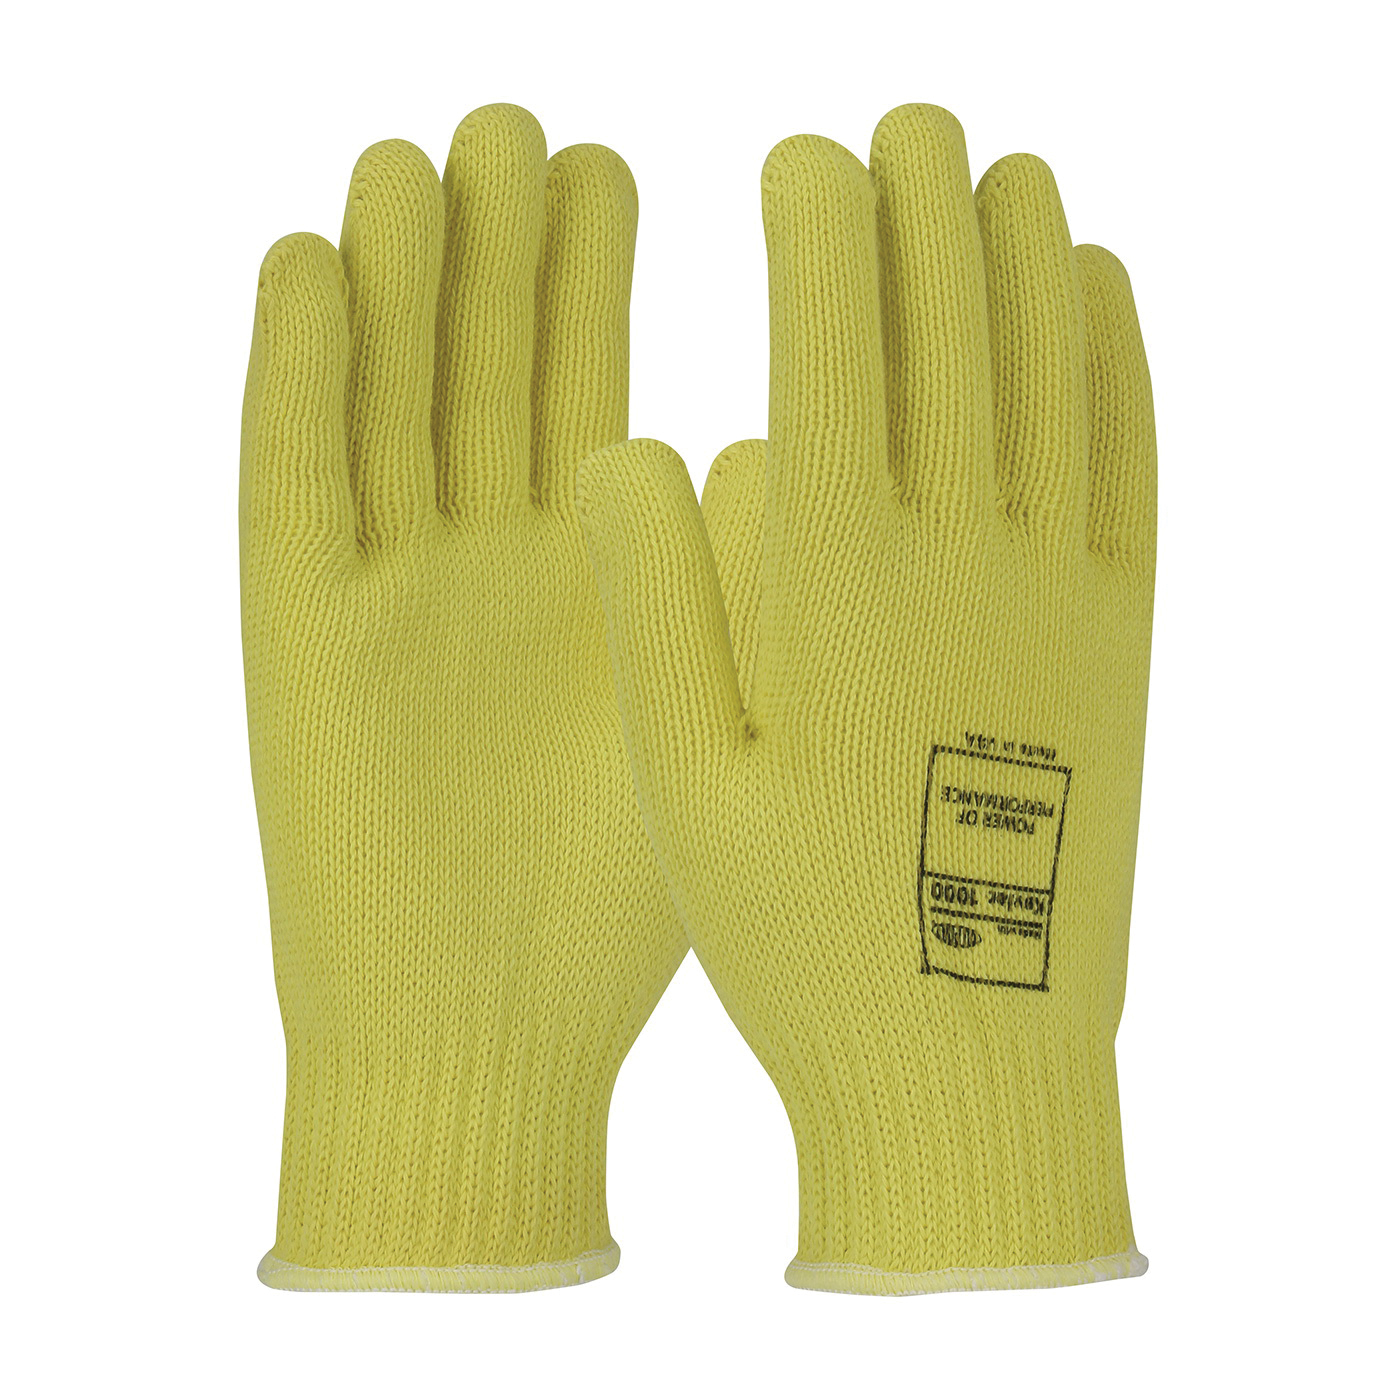 PIP® Kut-Gard® 07-K350 Heavyweight Unisex Cut Resistant Gloves, Uncoated Coating, DuPont™ Kevlar® Fiber, Elastic Knit Wrist Cuff, Resists: Cut, Flame and Heat, ANSI Cut-Resistance Level: A3